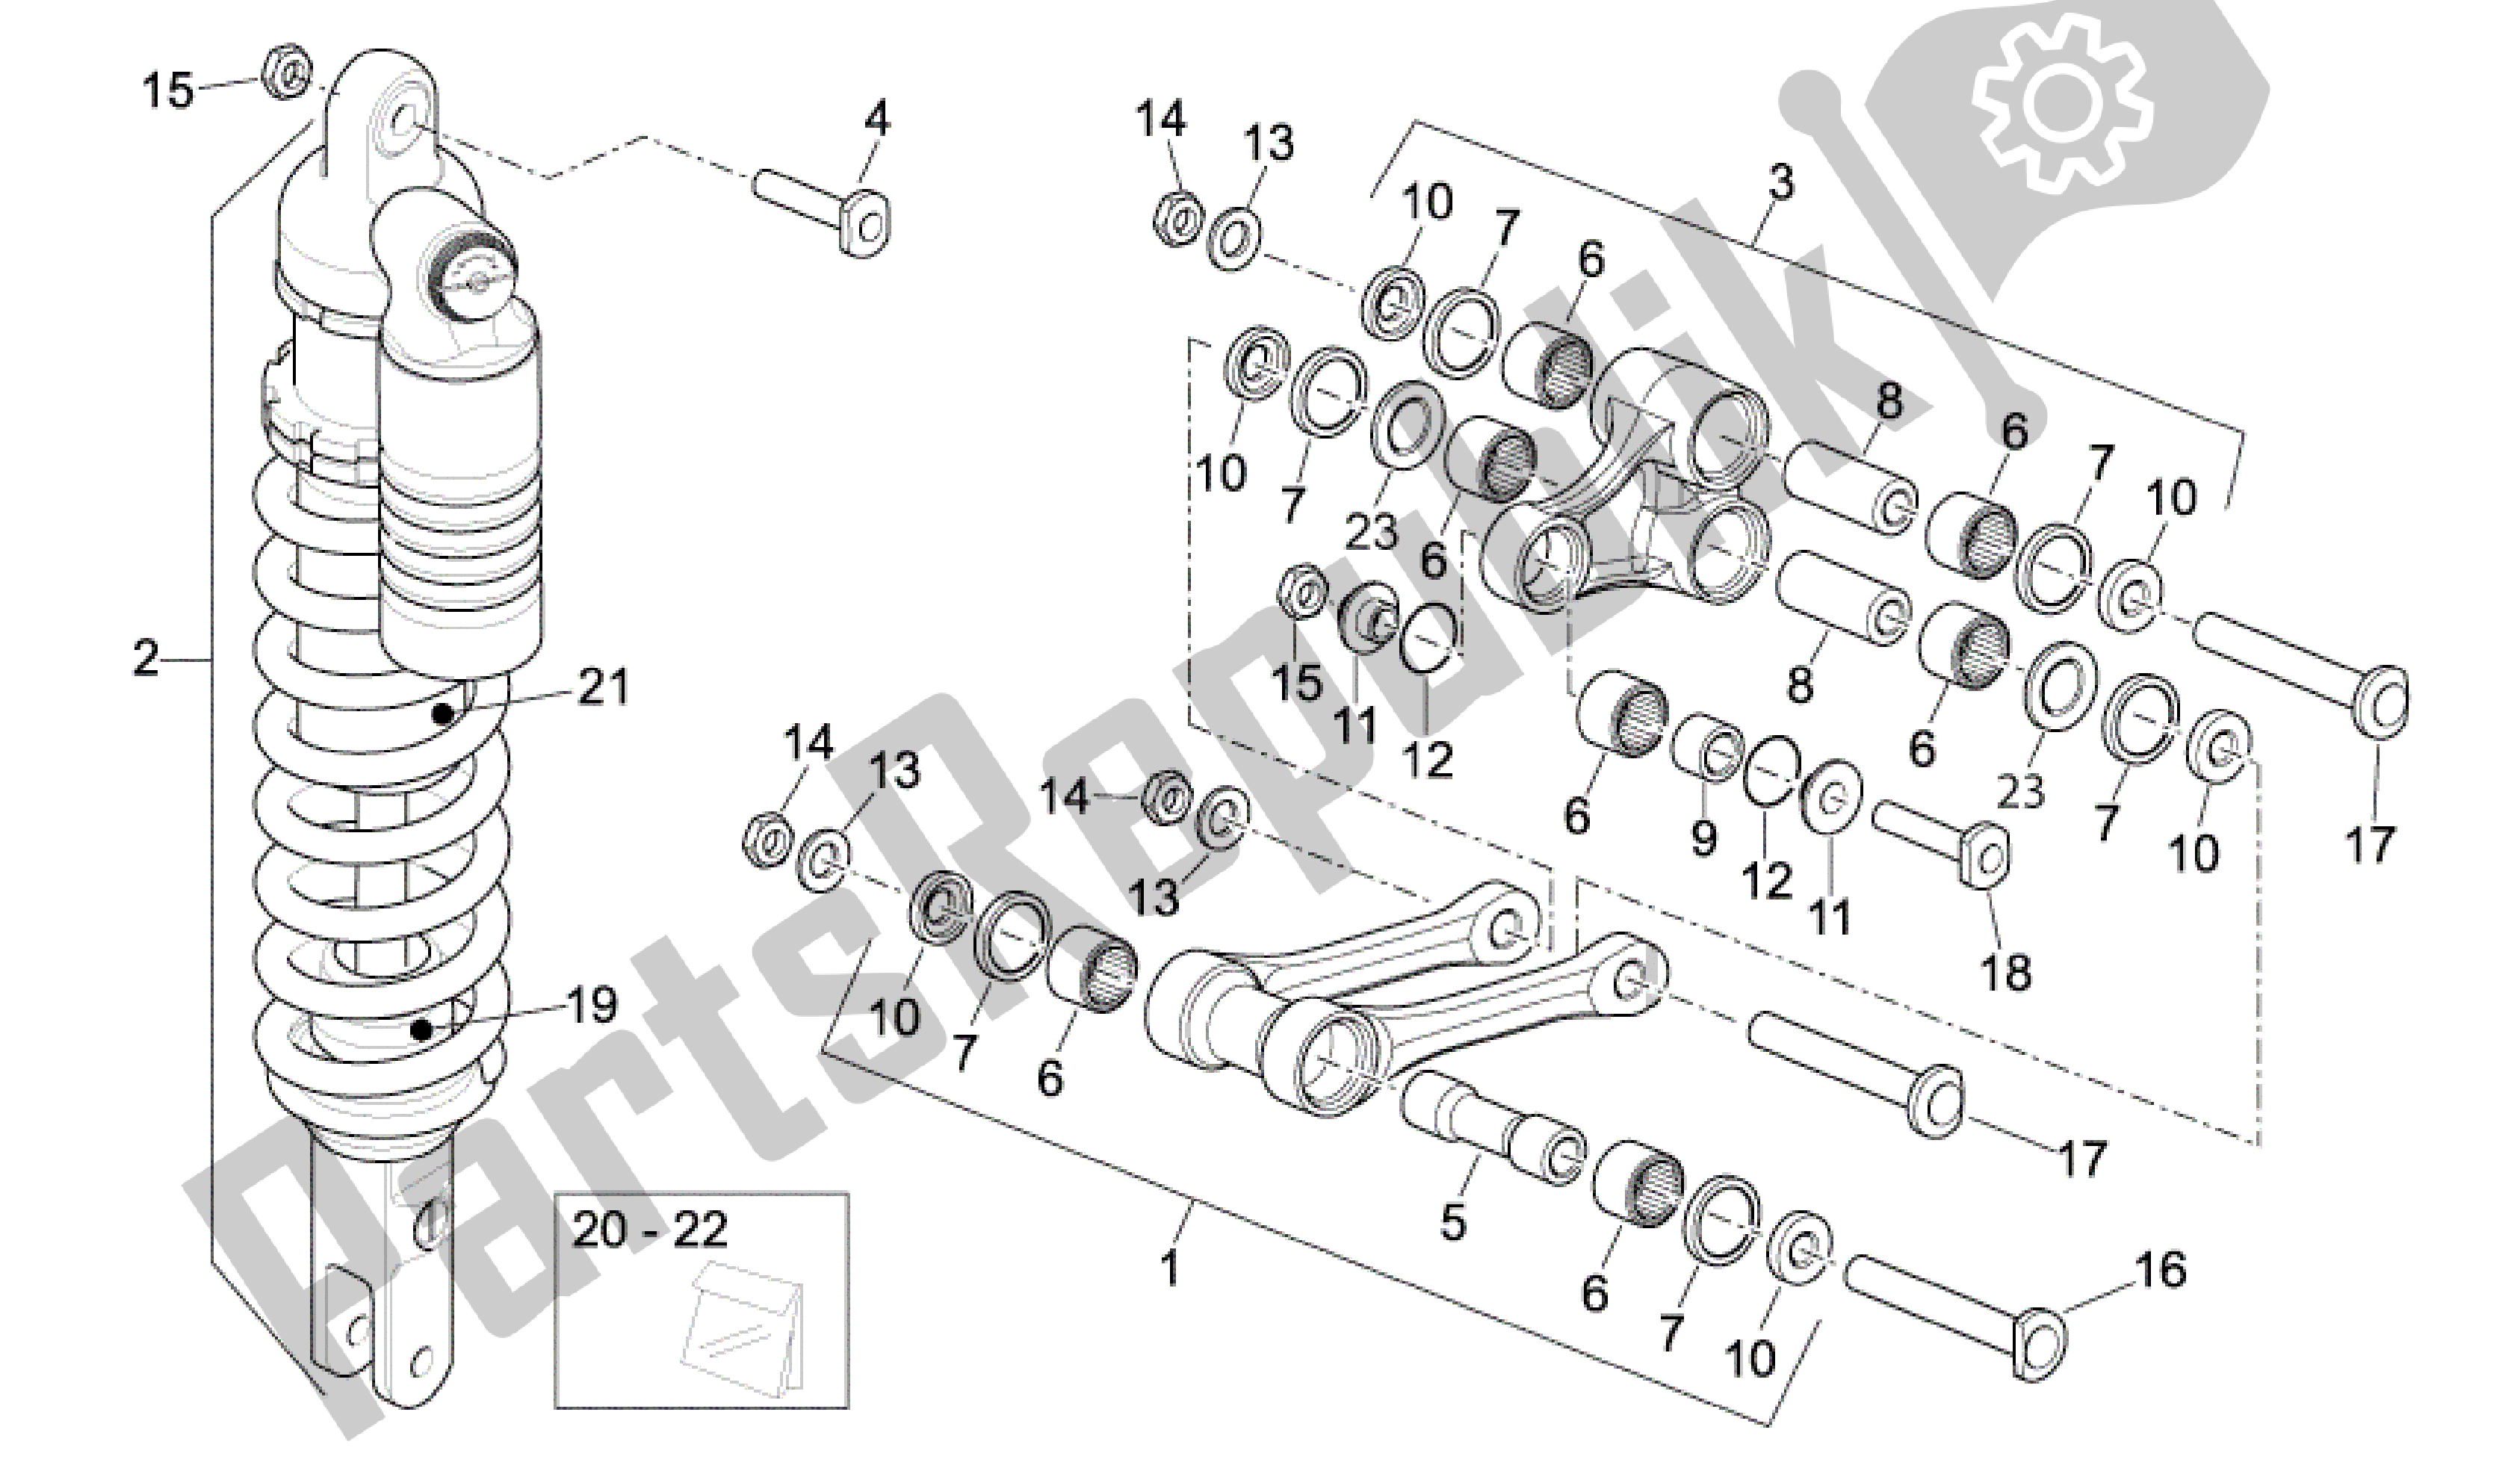 All parts for the Rear Shock Absorber of the Aprilia MXV 450 2008 - 2010